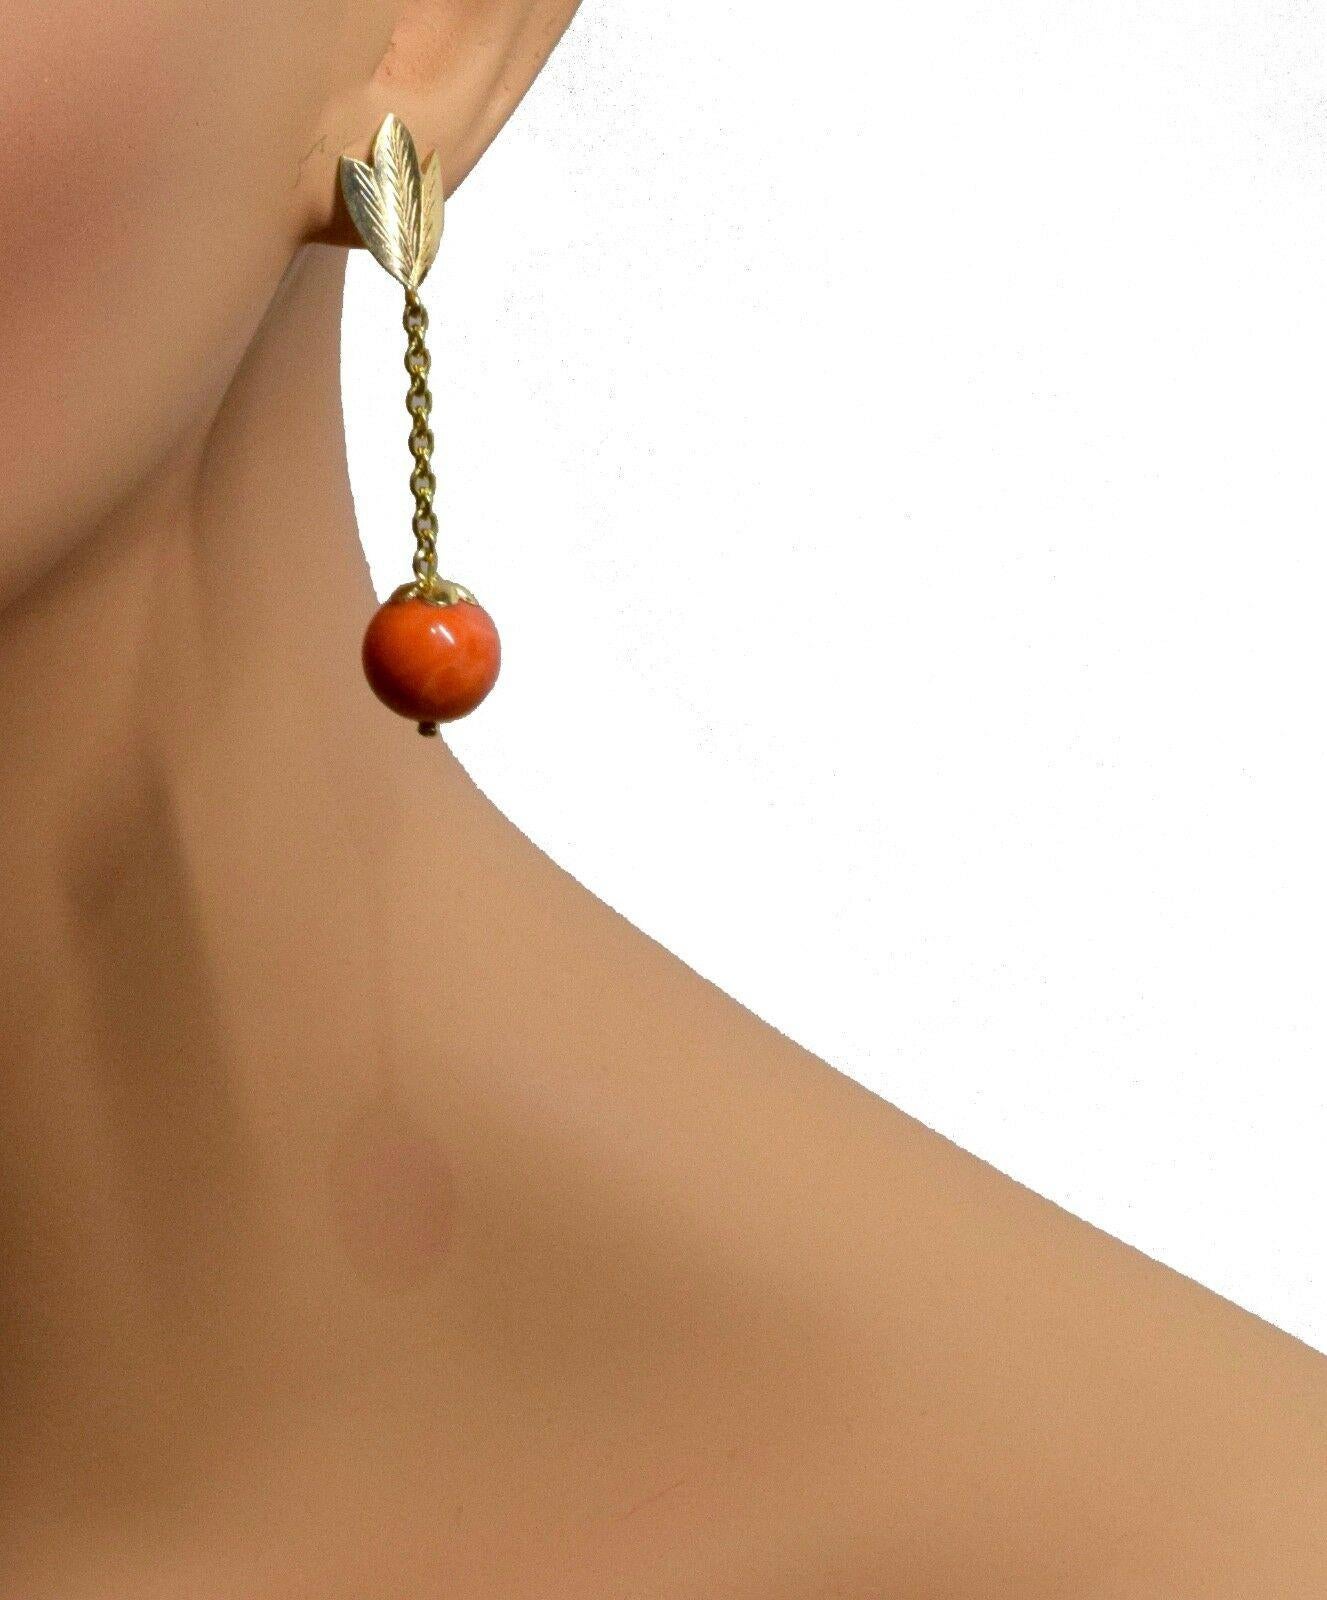 Brilliance Jewels, Miami
Questions? Call Us Anytime!
786,482,8100

Metal: Yellow Gold

Metal Purity: 18k

Stones: Natural Red Coral

Coral Diameter: 12.84 mm

Earring Length: approx. 2.15 inches

Total Item Weight (grams): 11.3